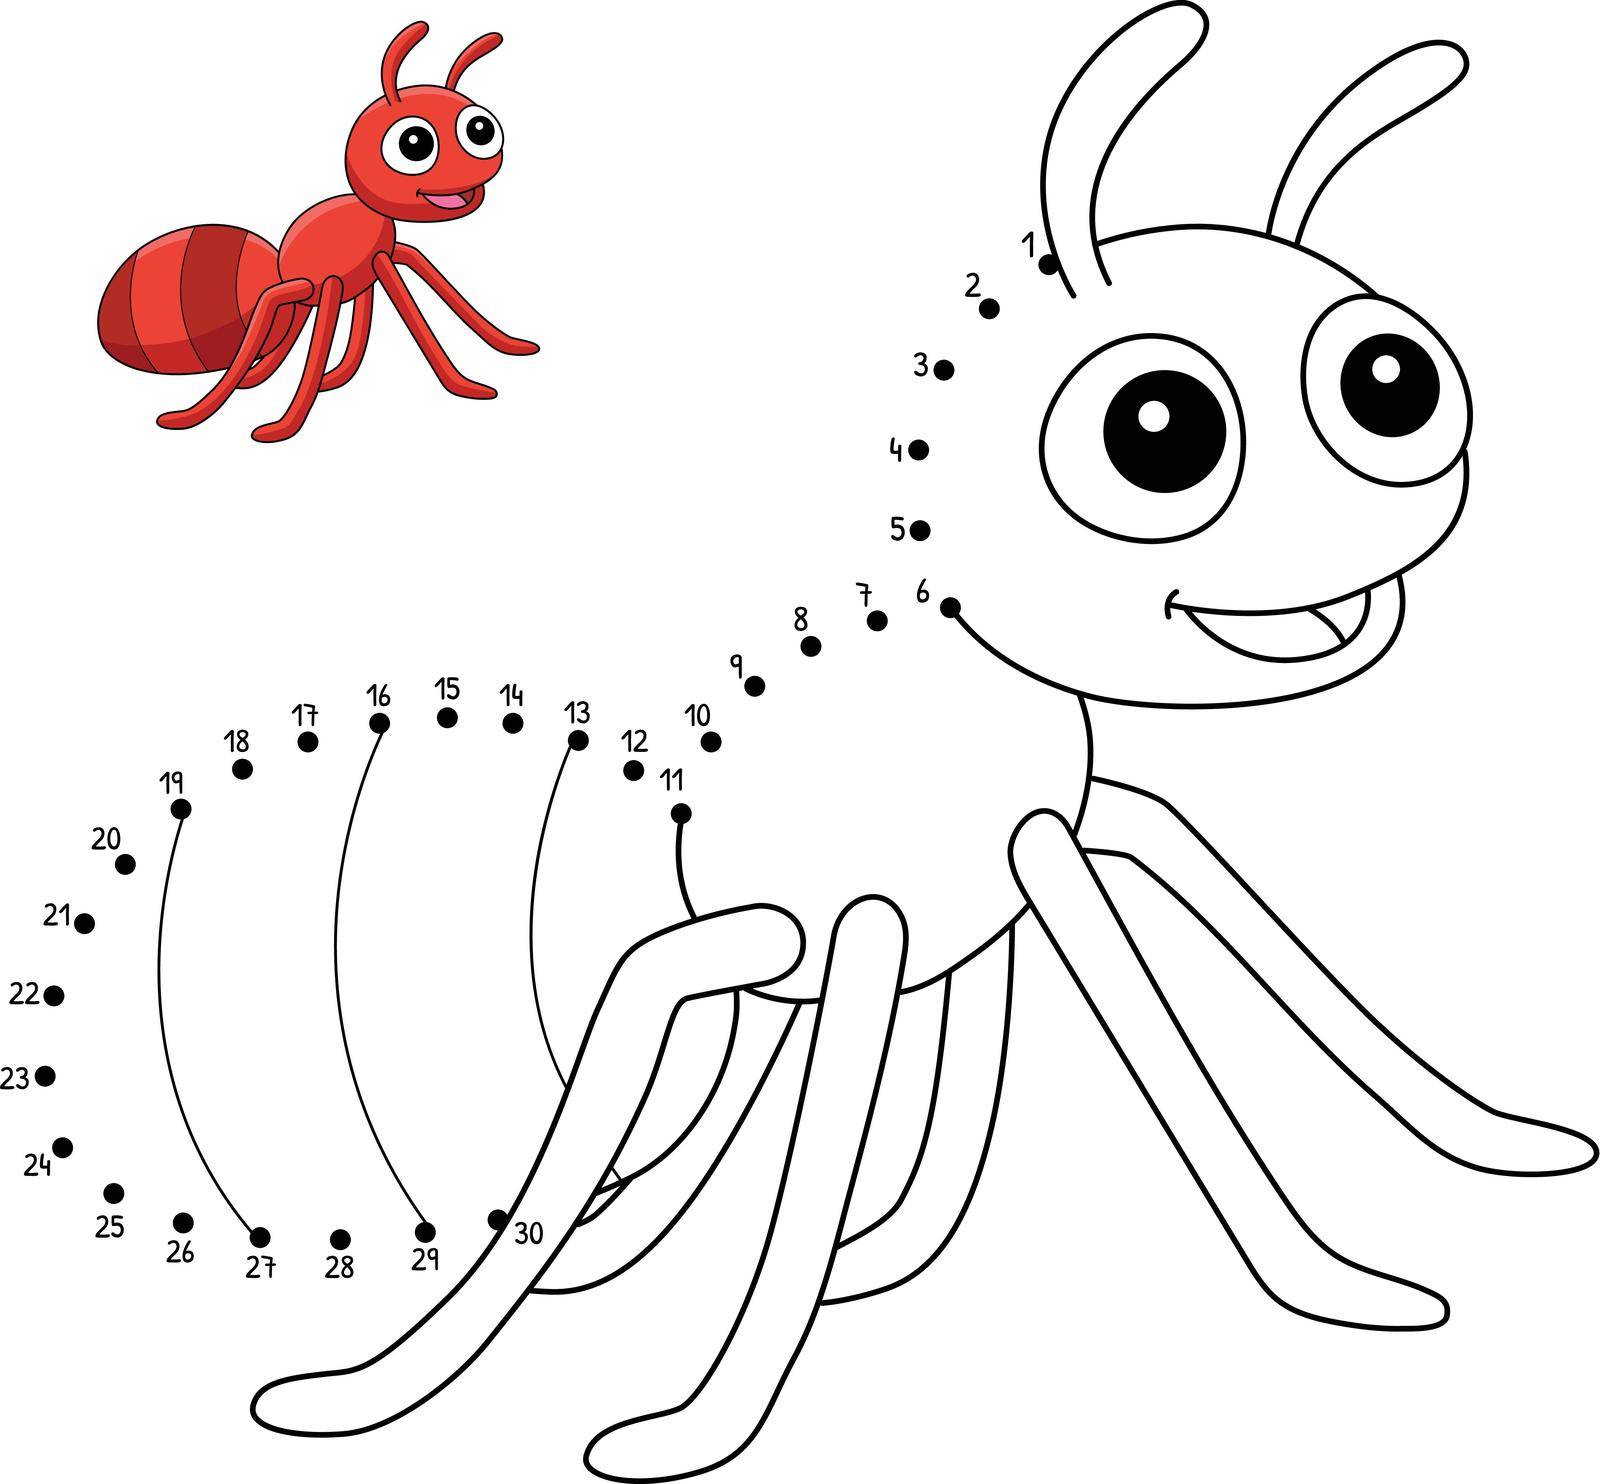 A cute and funny connect-the-dots coloring page of an Ant. Provides hours of coloring fun for children. Color, this page is very easy. Suitable for little kids and toddlers.